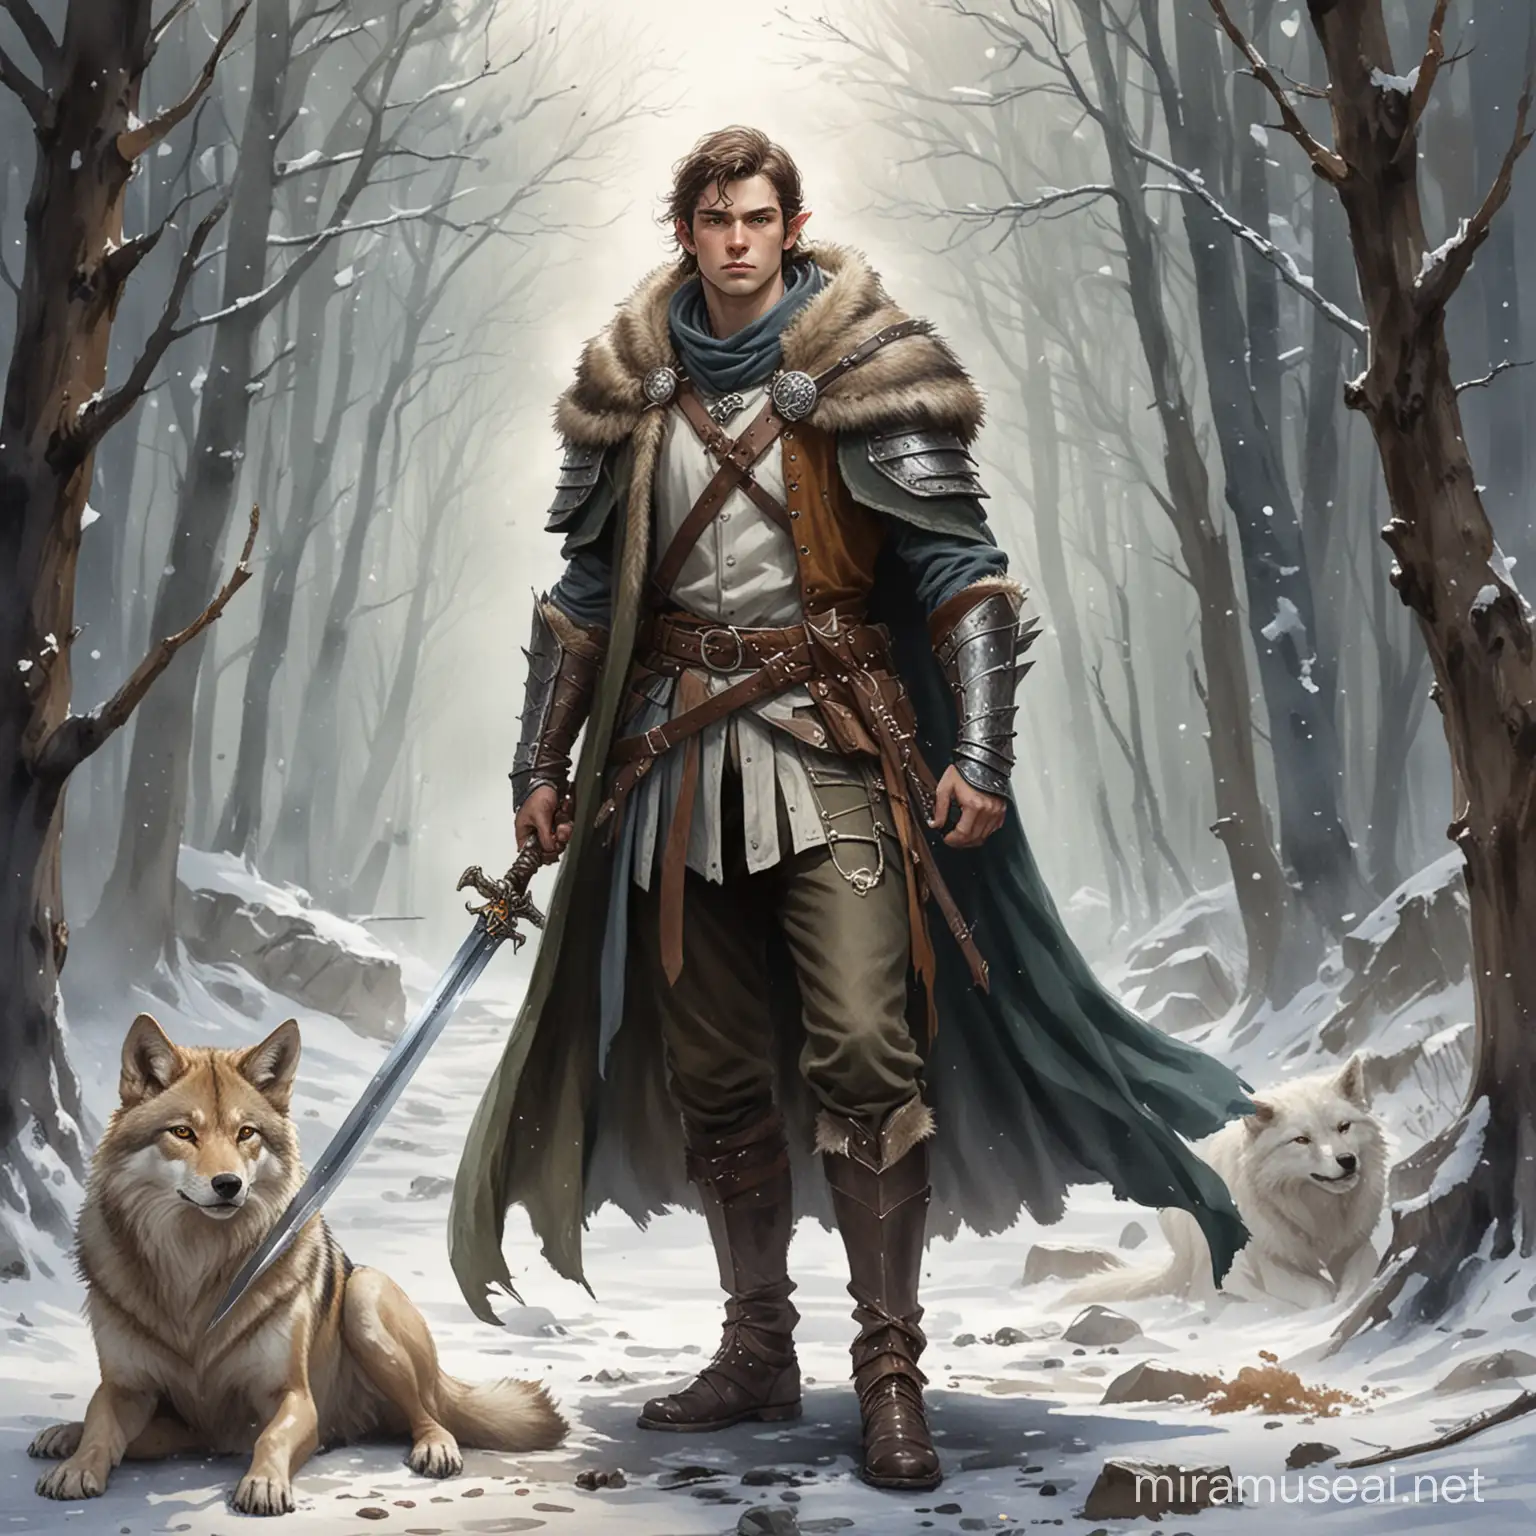 Watercolor Fantasy Art Young Male HalfElf Battlesmith with Wolf Companion